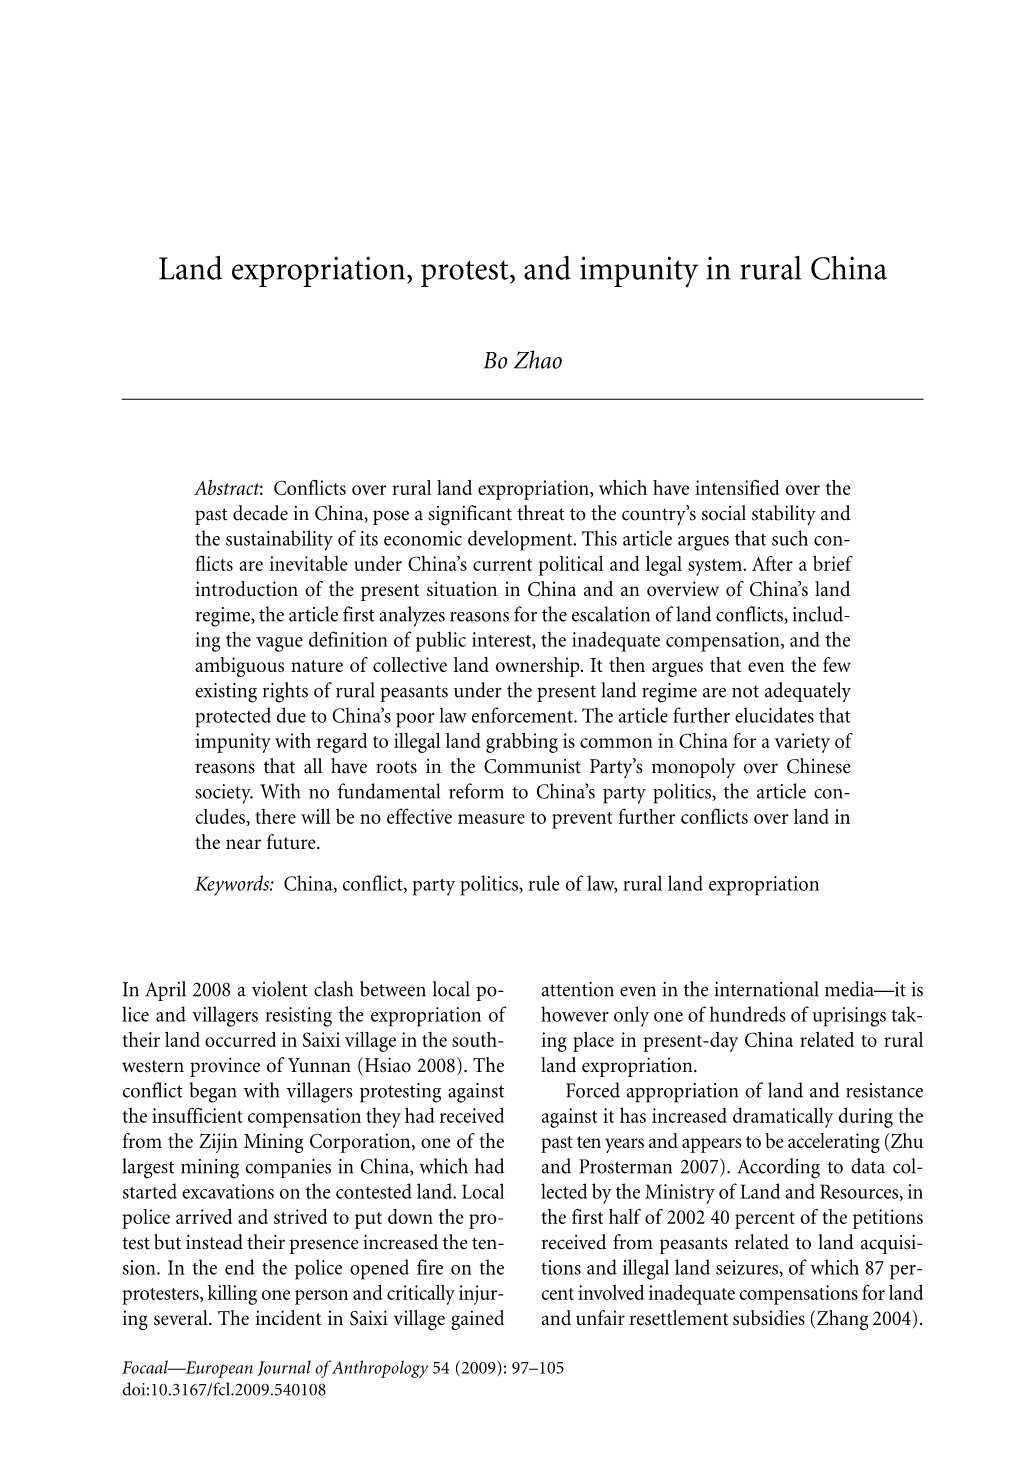 Land Expropriation, Protest, and Impunity in Rural China